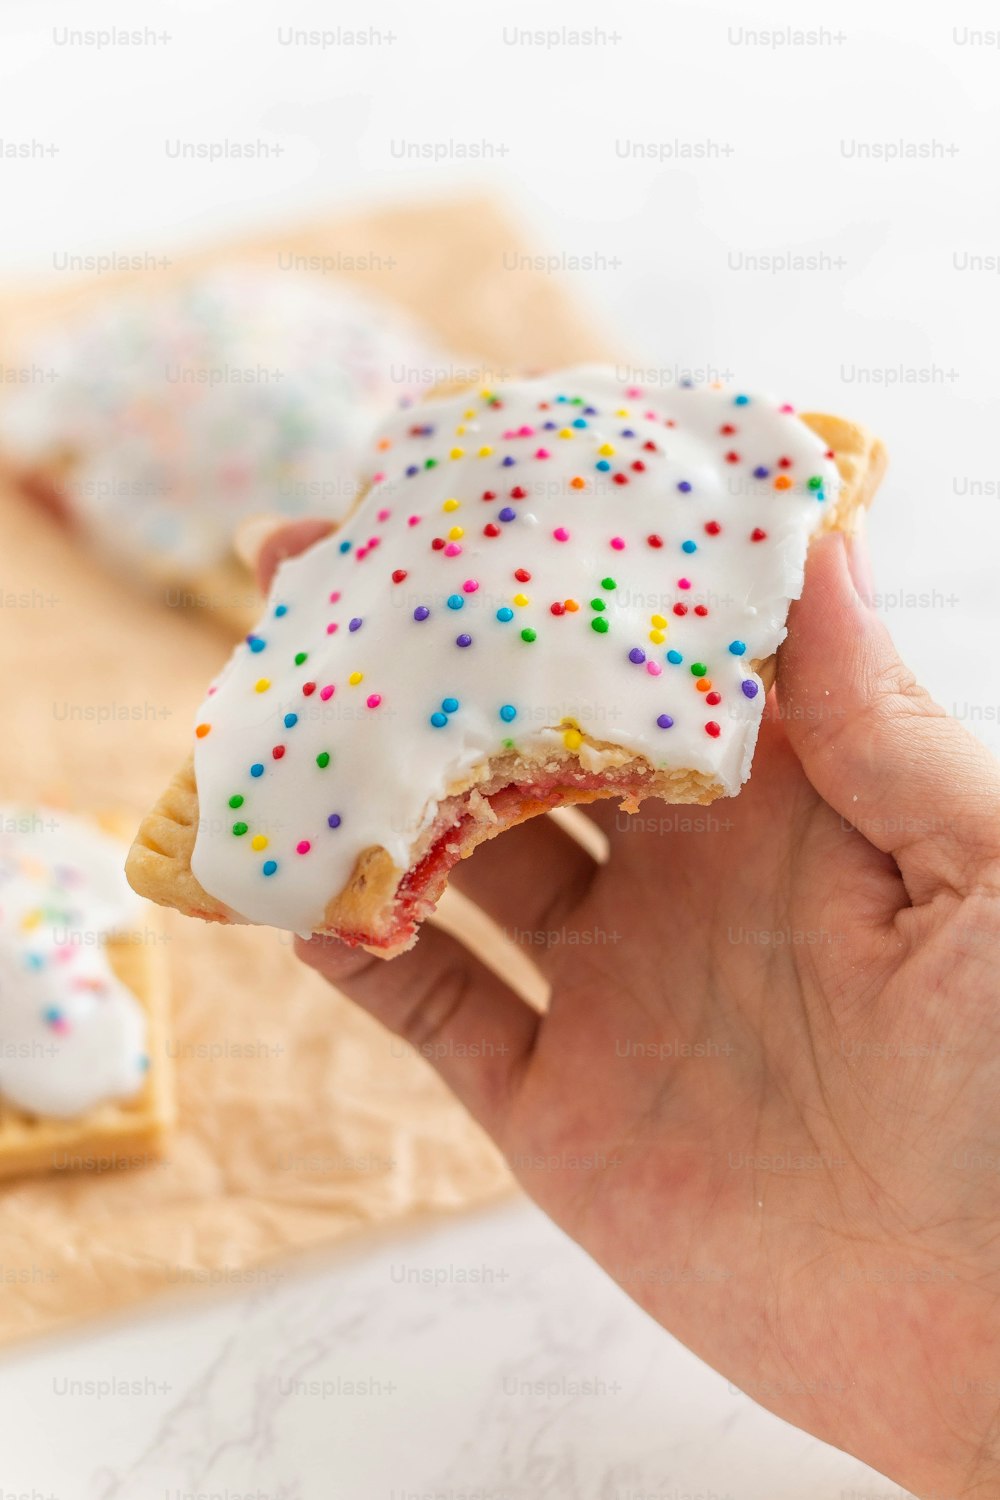 a hand holding a sprinkled donut on a toothpick